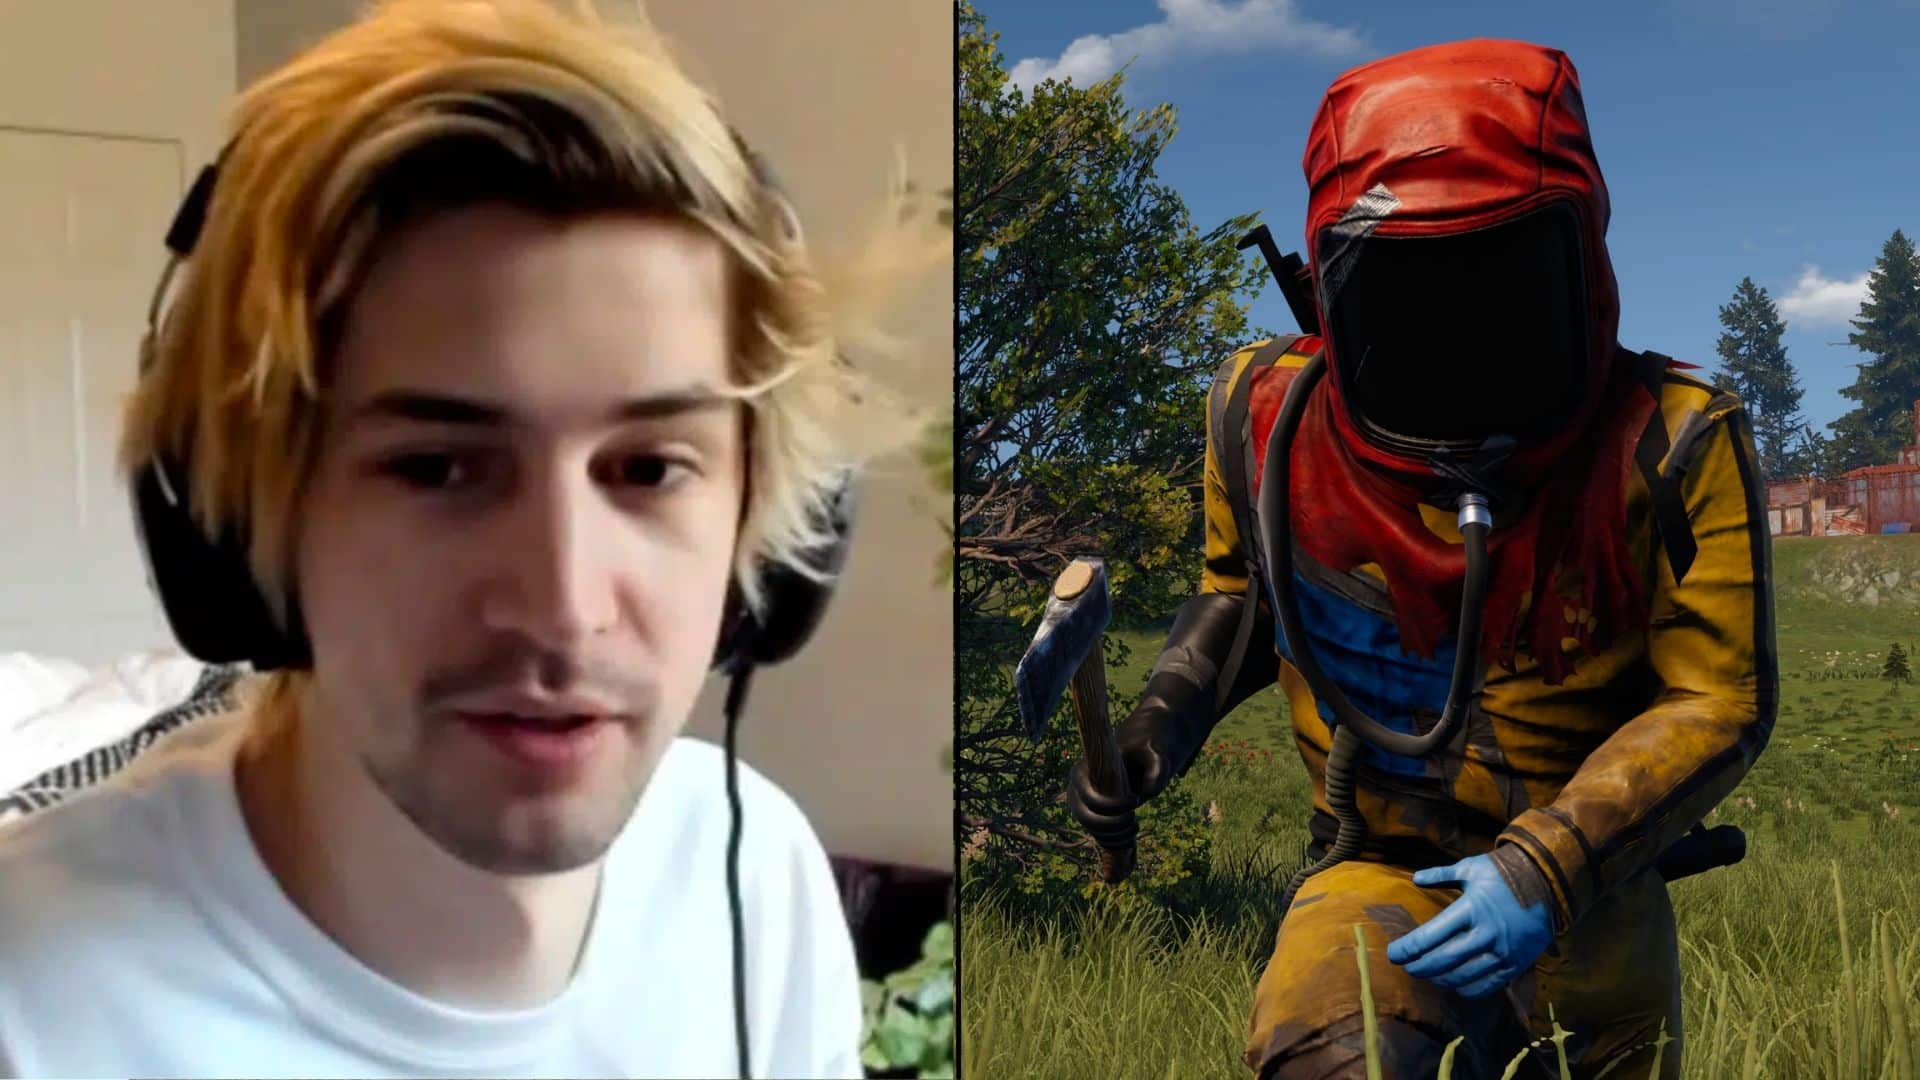 xQc side-by-side with rust character holding axe